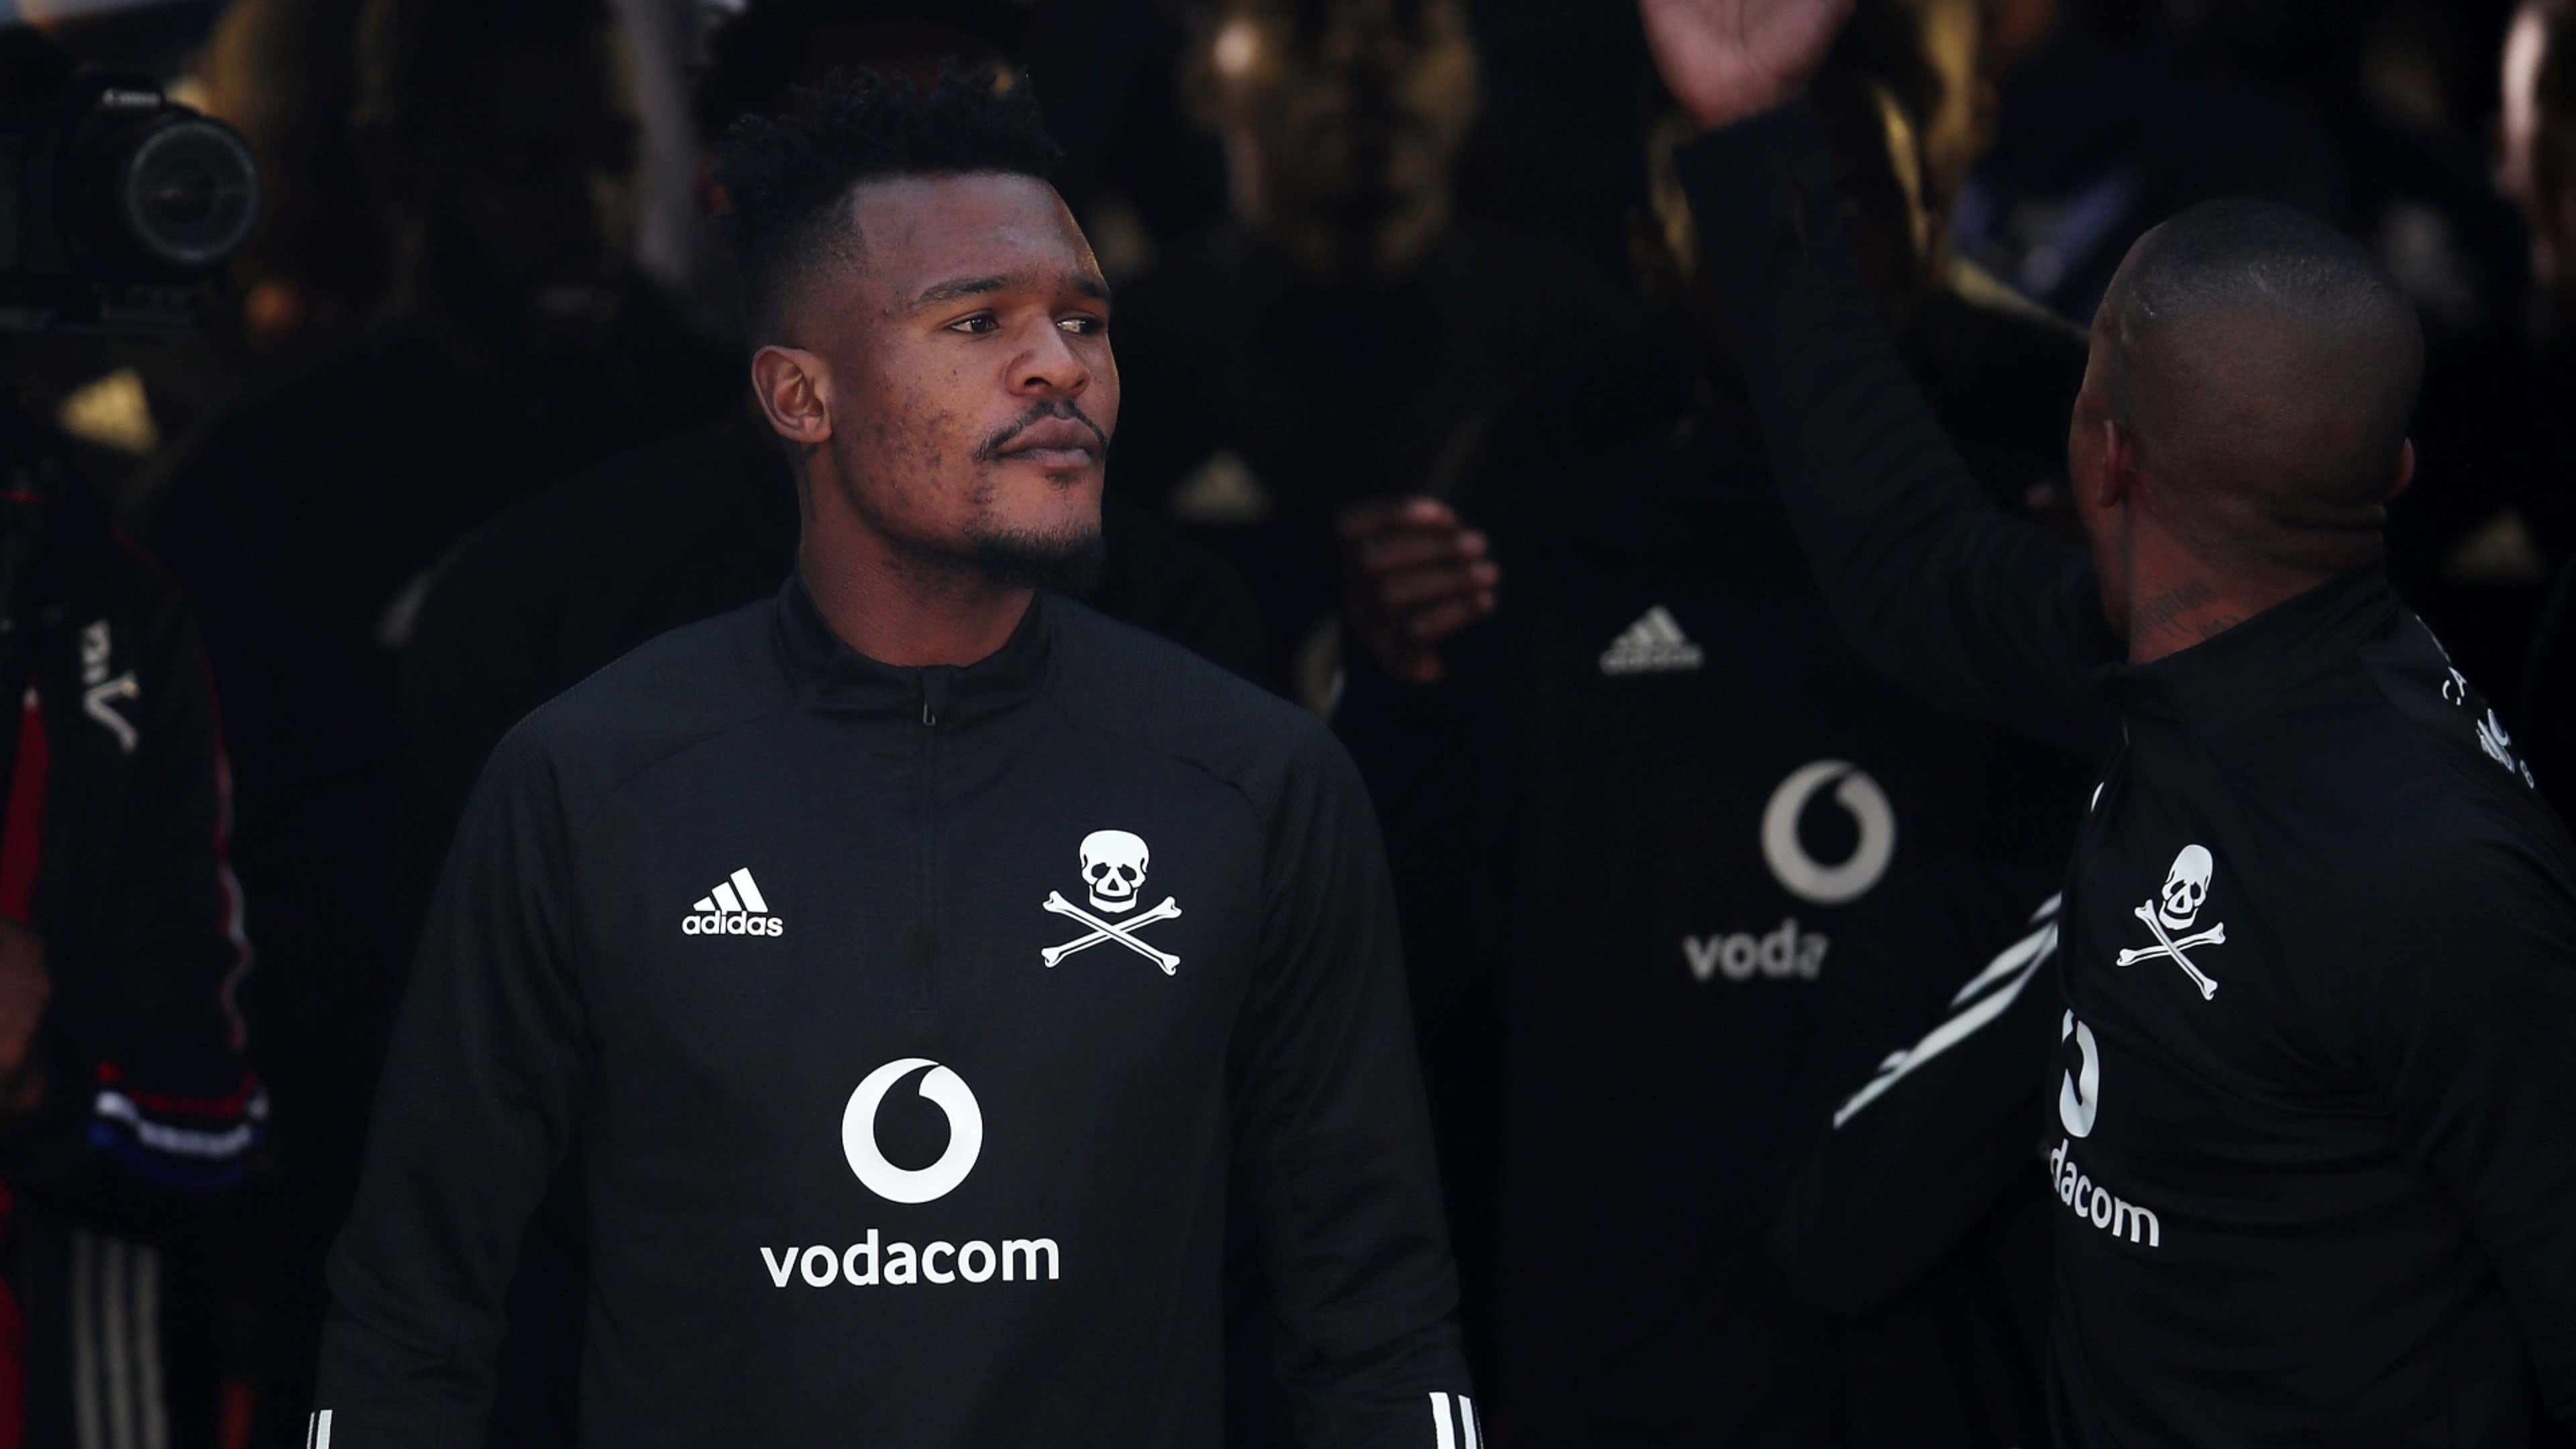 Here's why Royal AM mentor John Maduka extended a helping hand to Orlando  Pirates outcast Nkanyiso Zungu